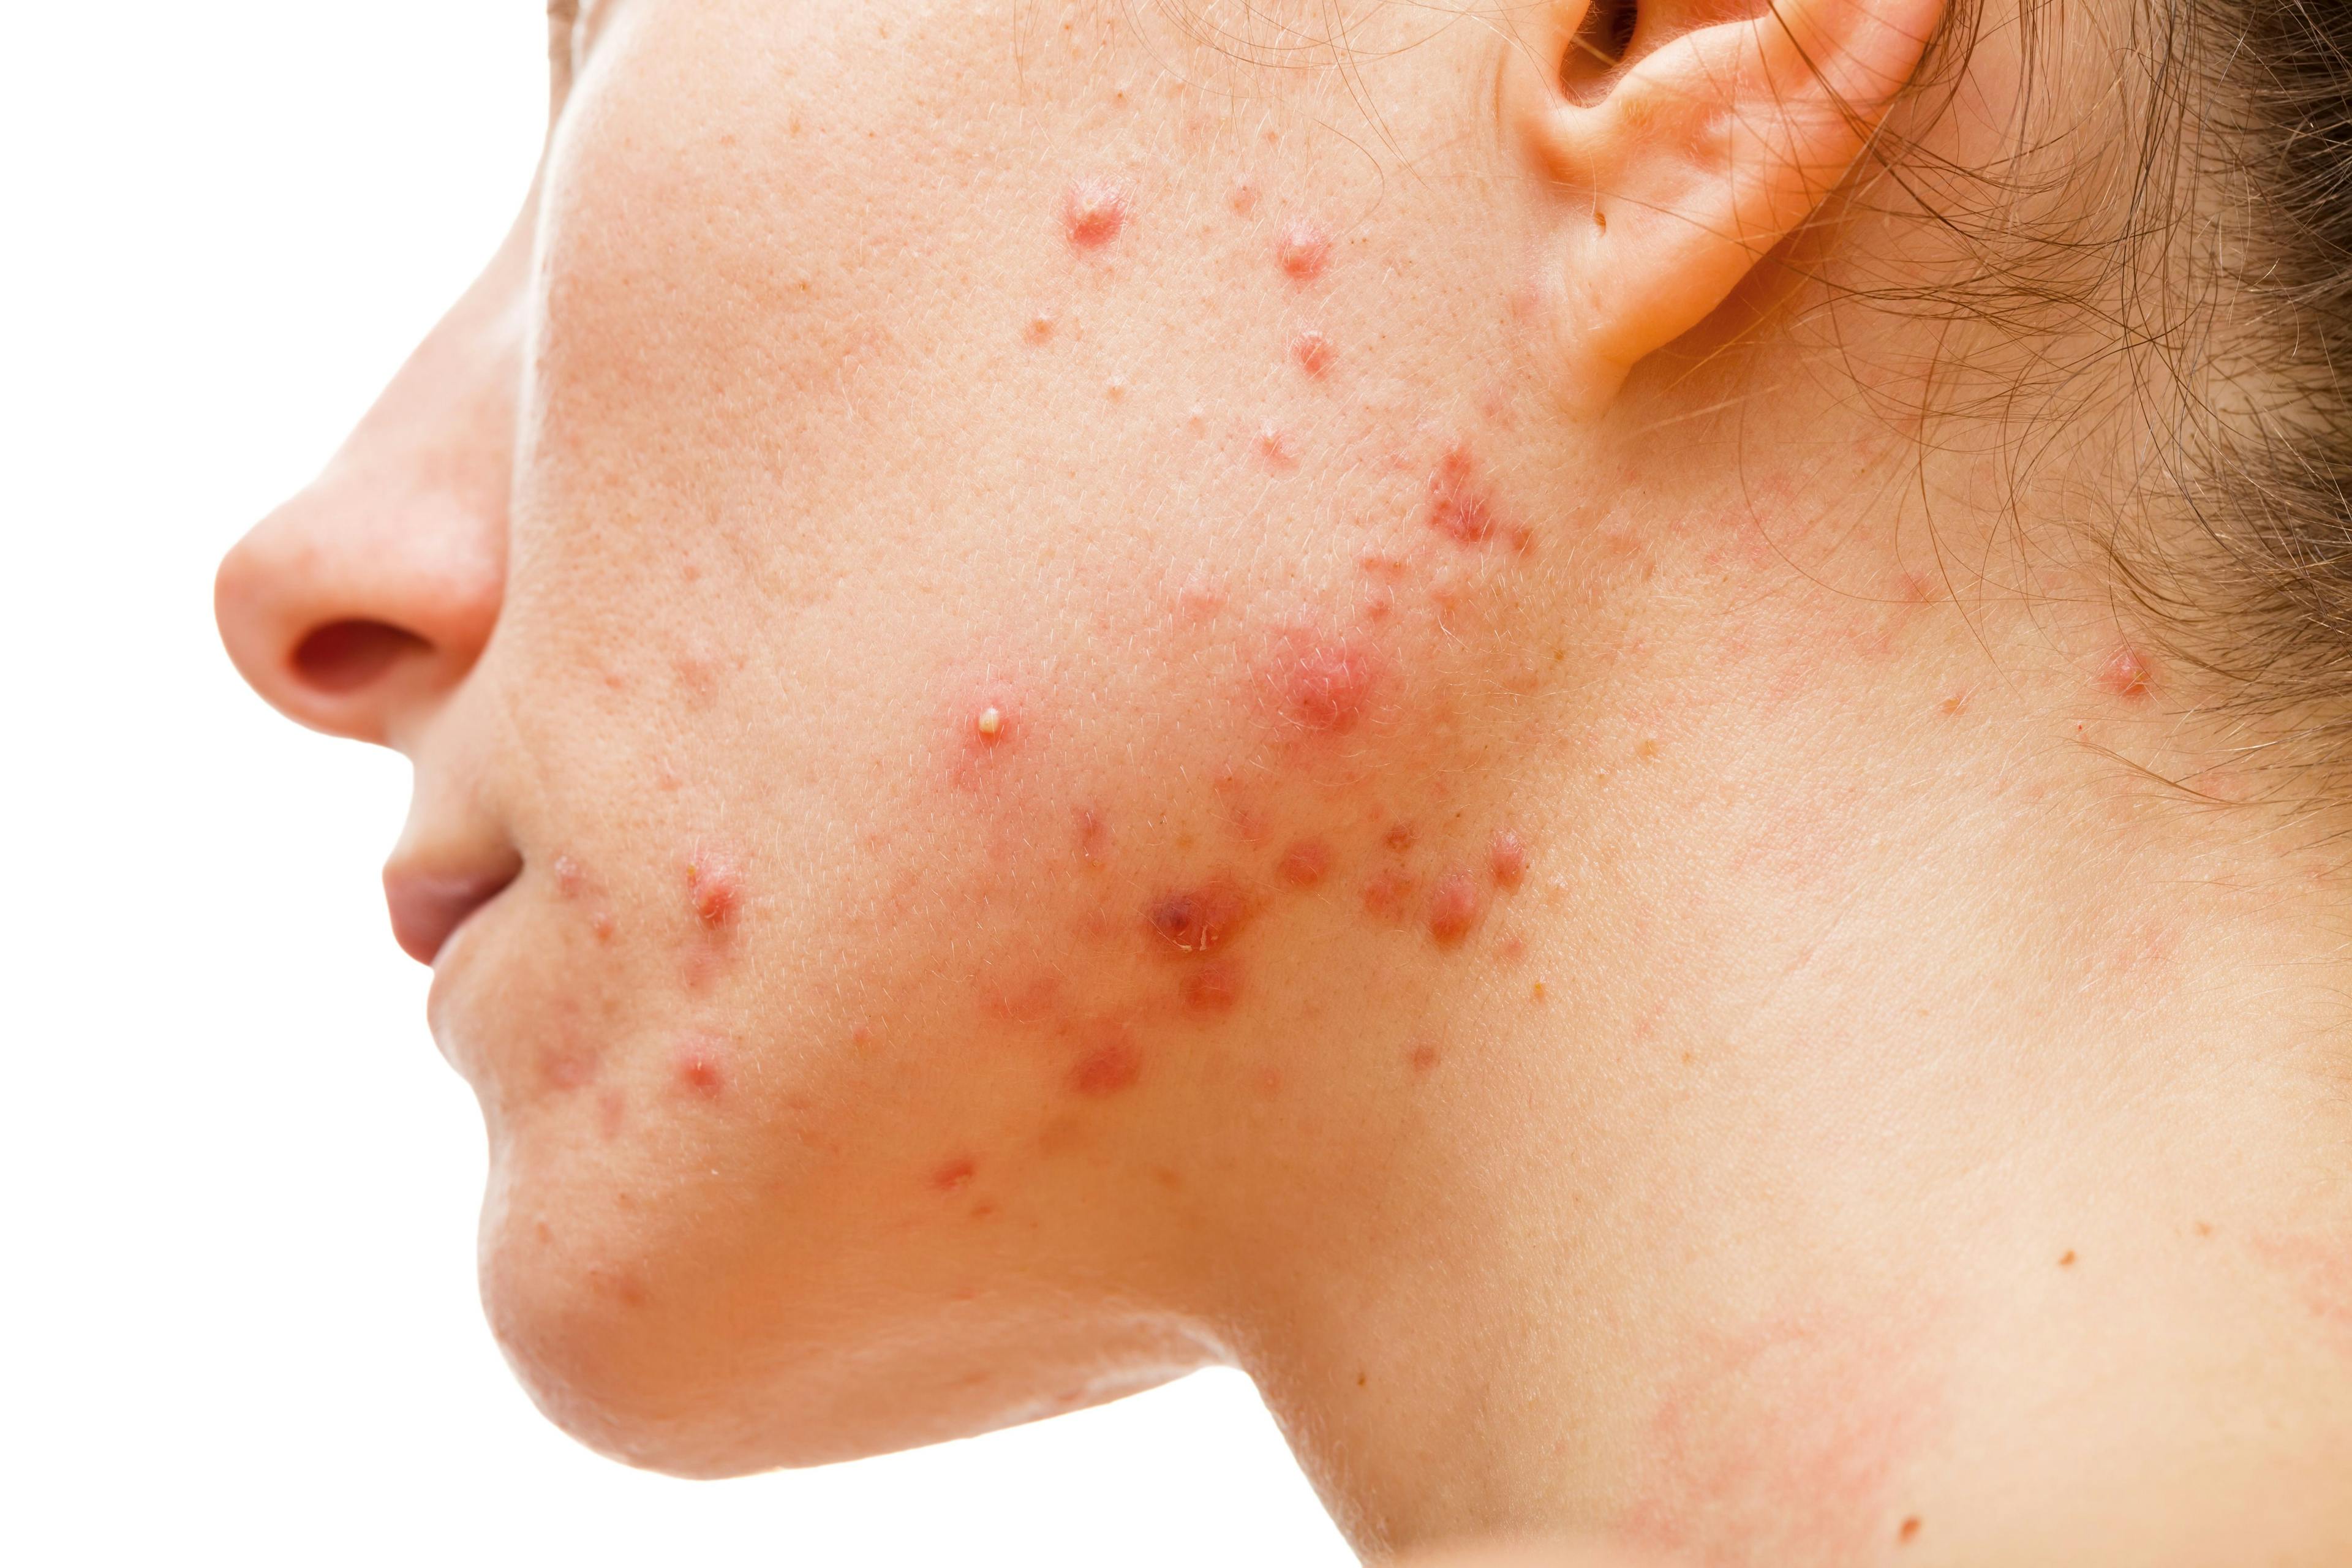 inflamed, red acne lesions on jawline